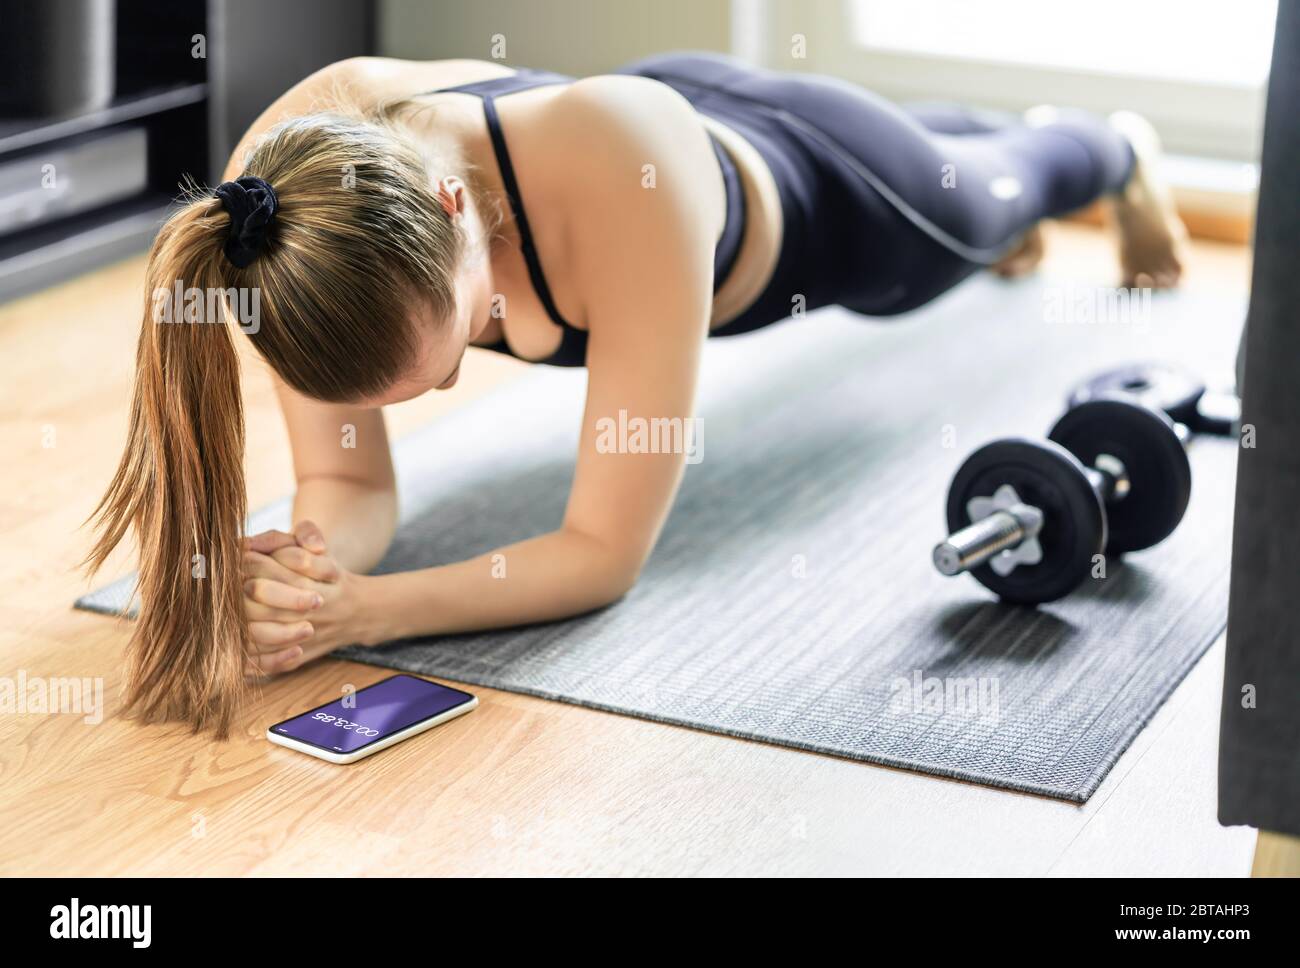 Home exercise and bodyweight training, plank. Fit woman taking time with sport tracker app in phone. Workout routine in living room gym. Stock Photo